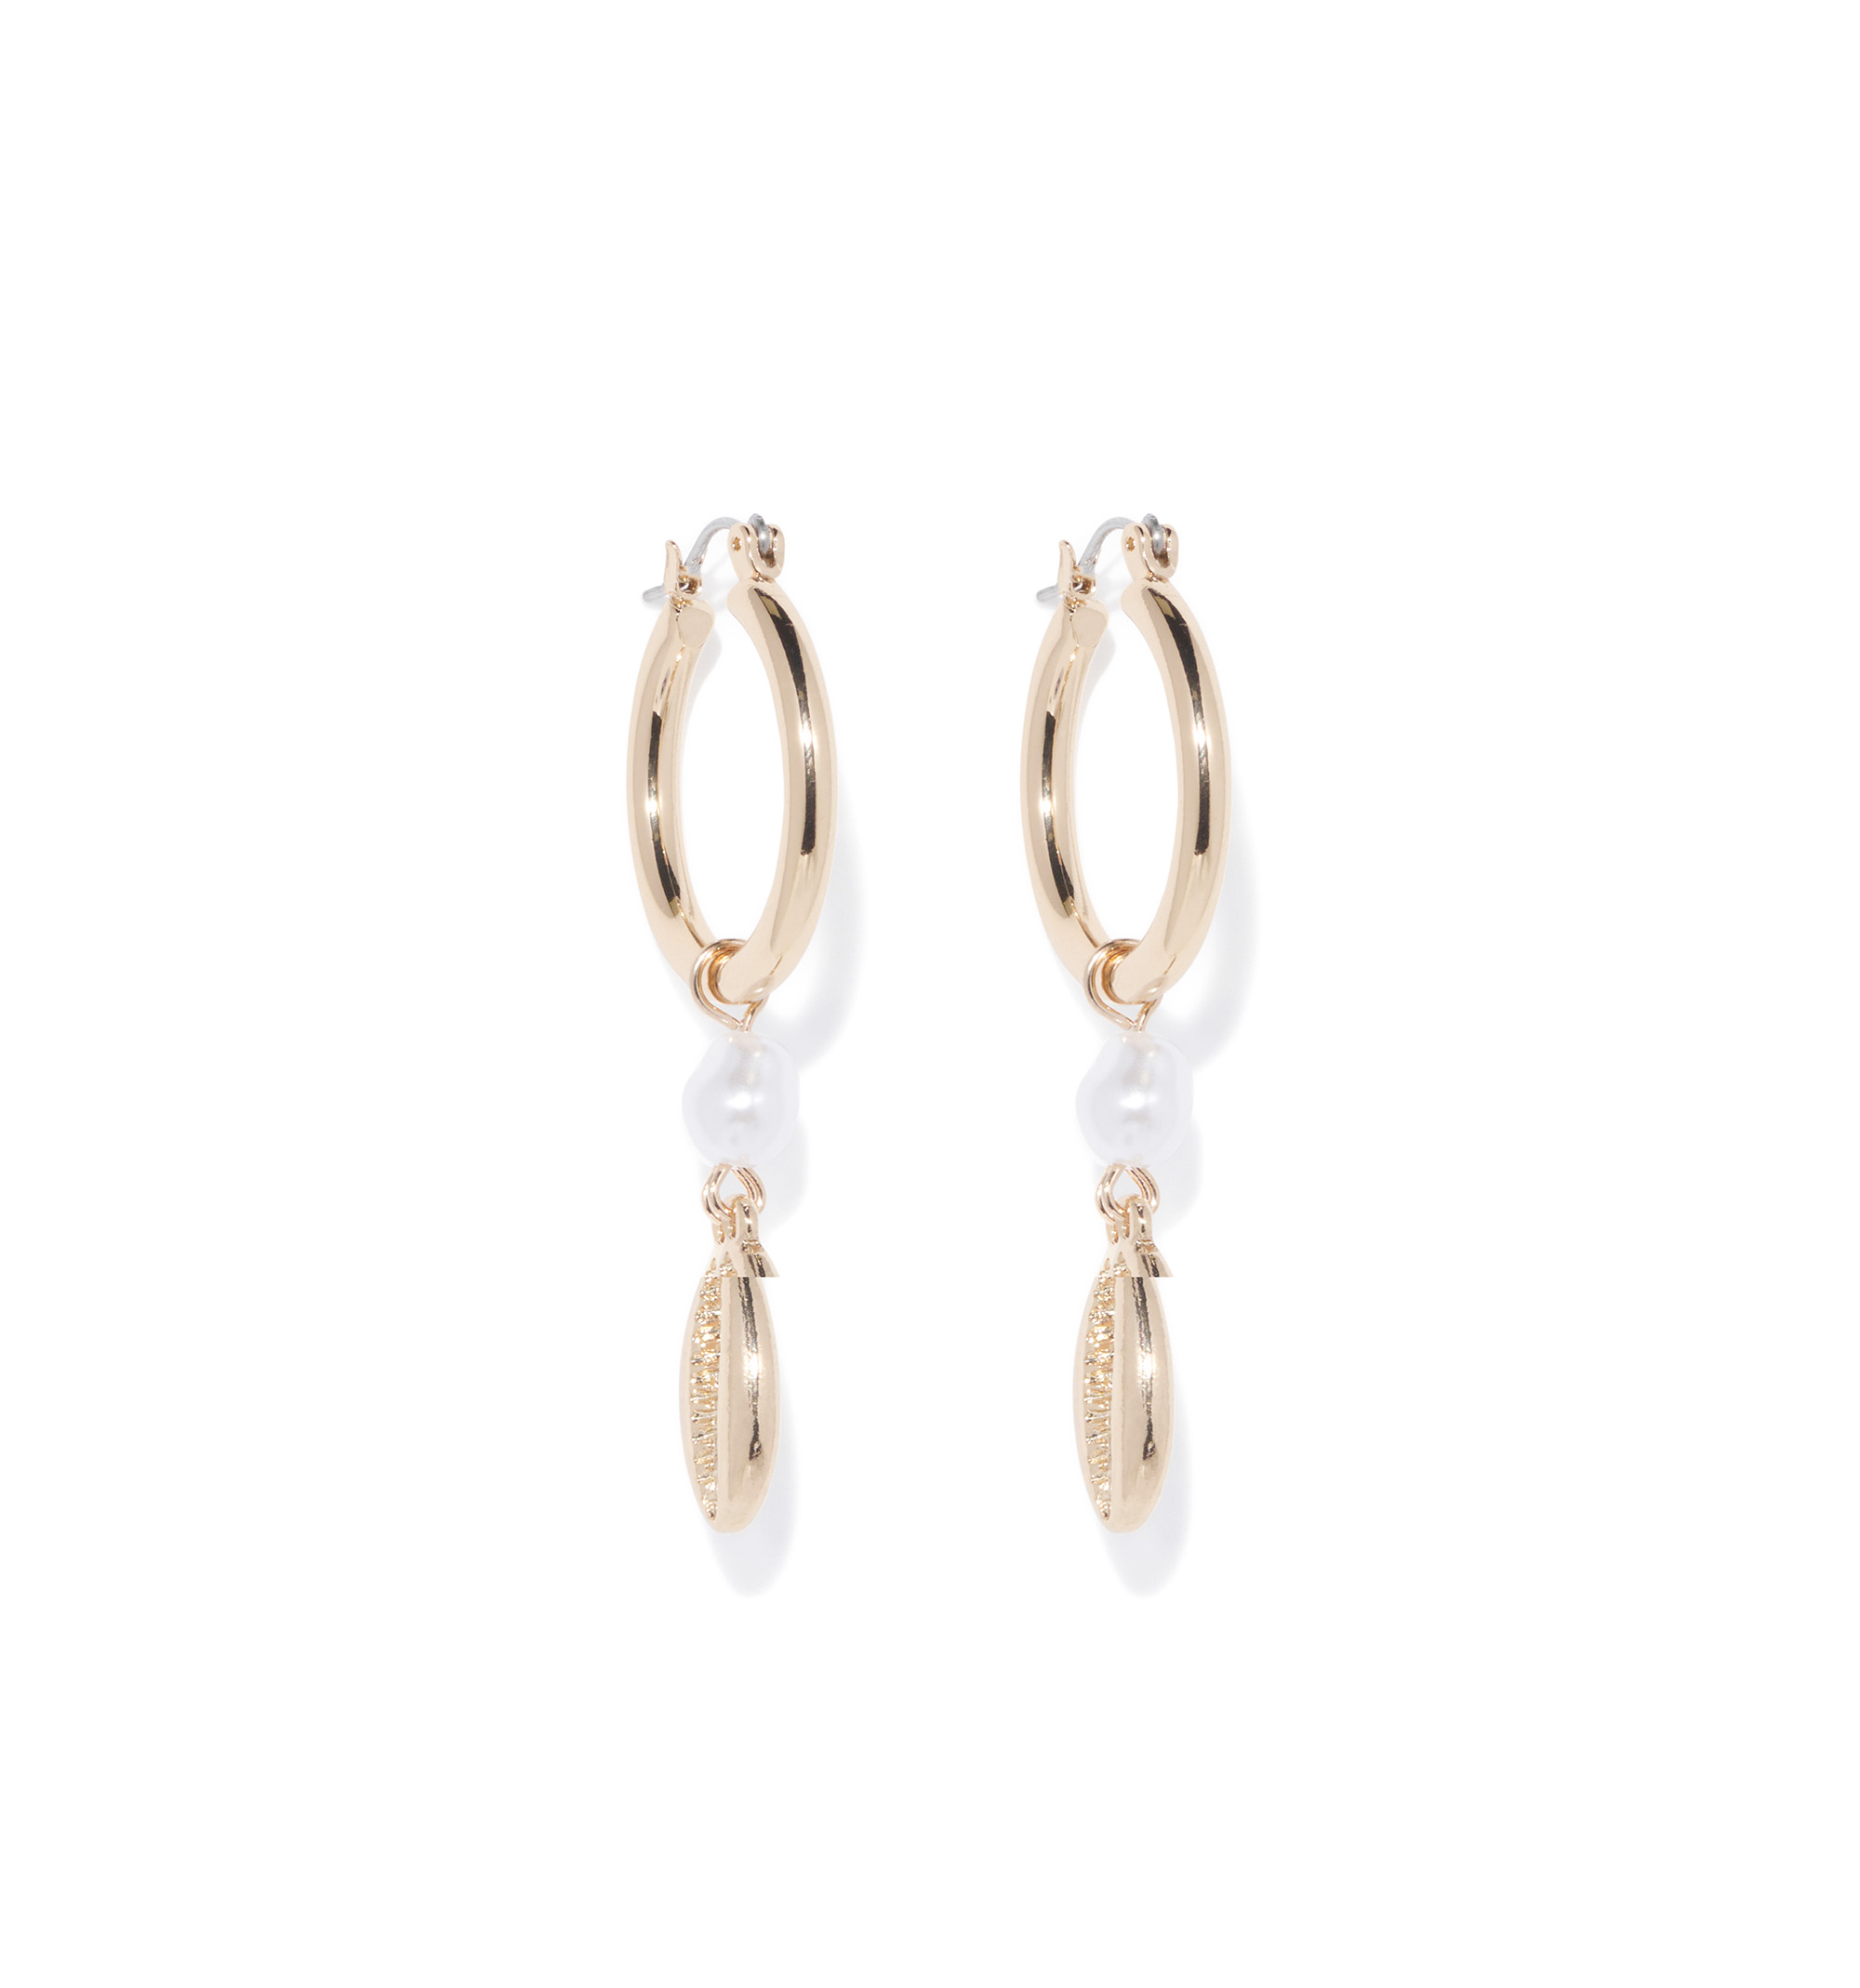 Buy Pearl Cluster Drop Earring Online - Accessorize India